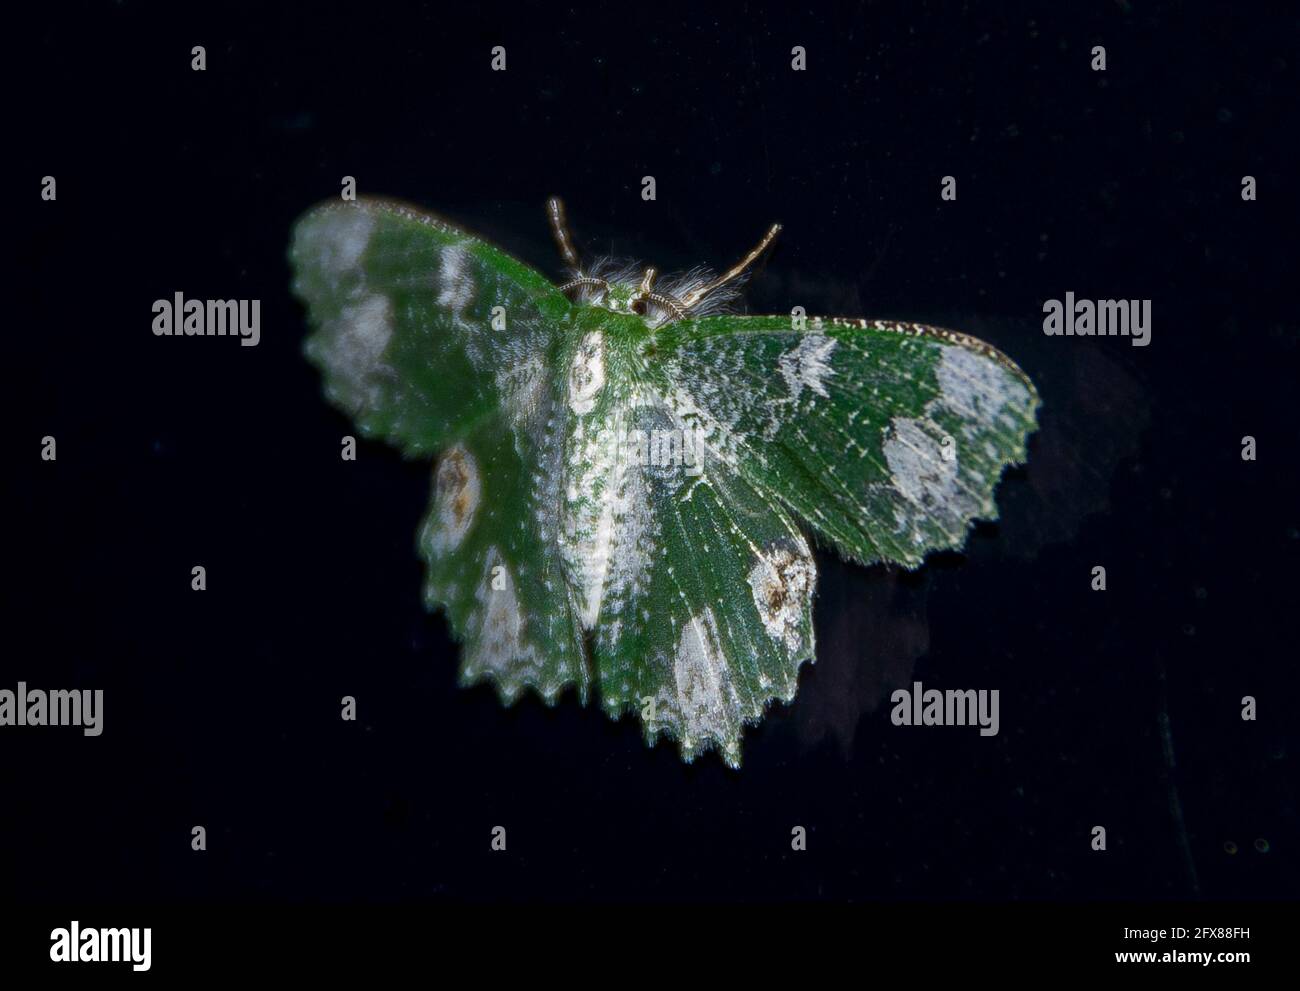 Large green and white spotted moth (Eucyclodes speciosa) on a black background (window). Nighttime, Queensland, Australia. Stock Photo